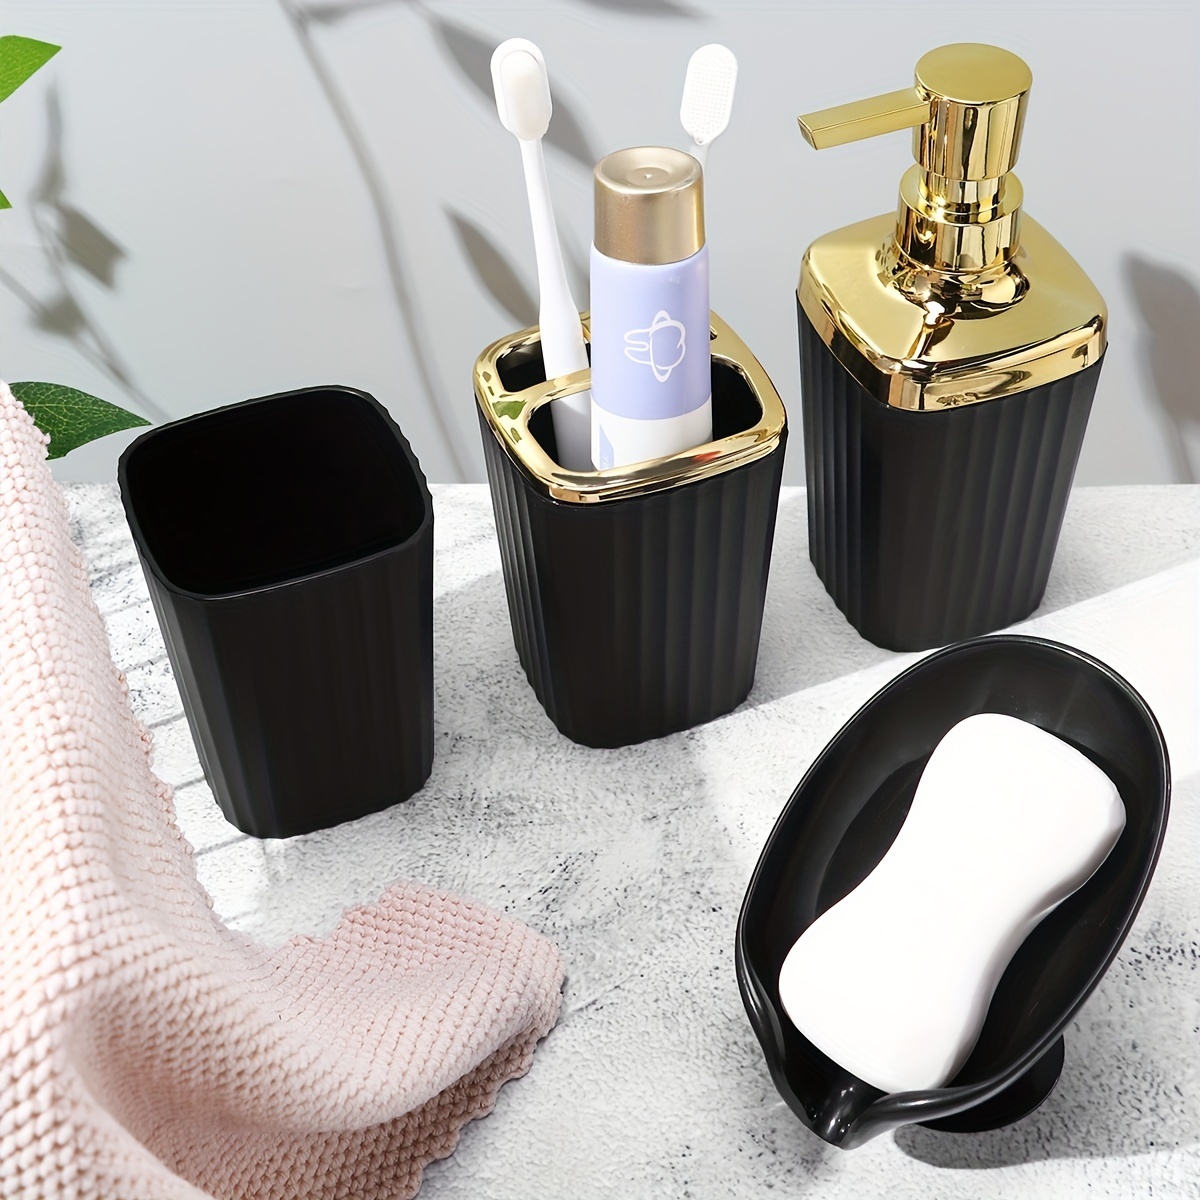 

4pcs Stylish And Functional Bathroom Kit With Lotion Dispenser, Toothbrush Holder, Mouthwash Cup, And Soap Dish - Perfect For Organizing Your Bathroom Essentials